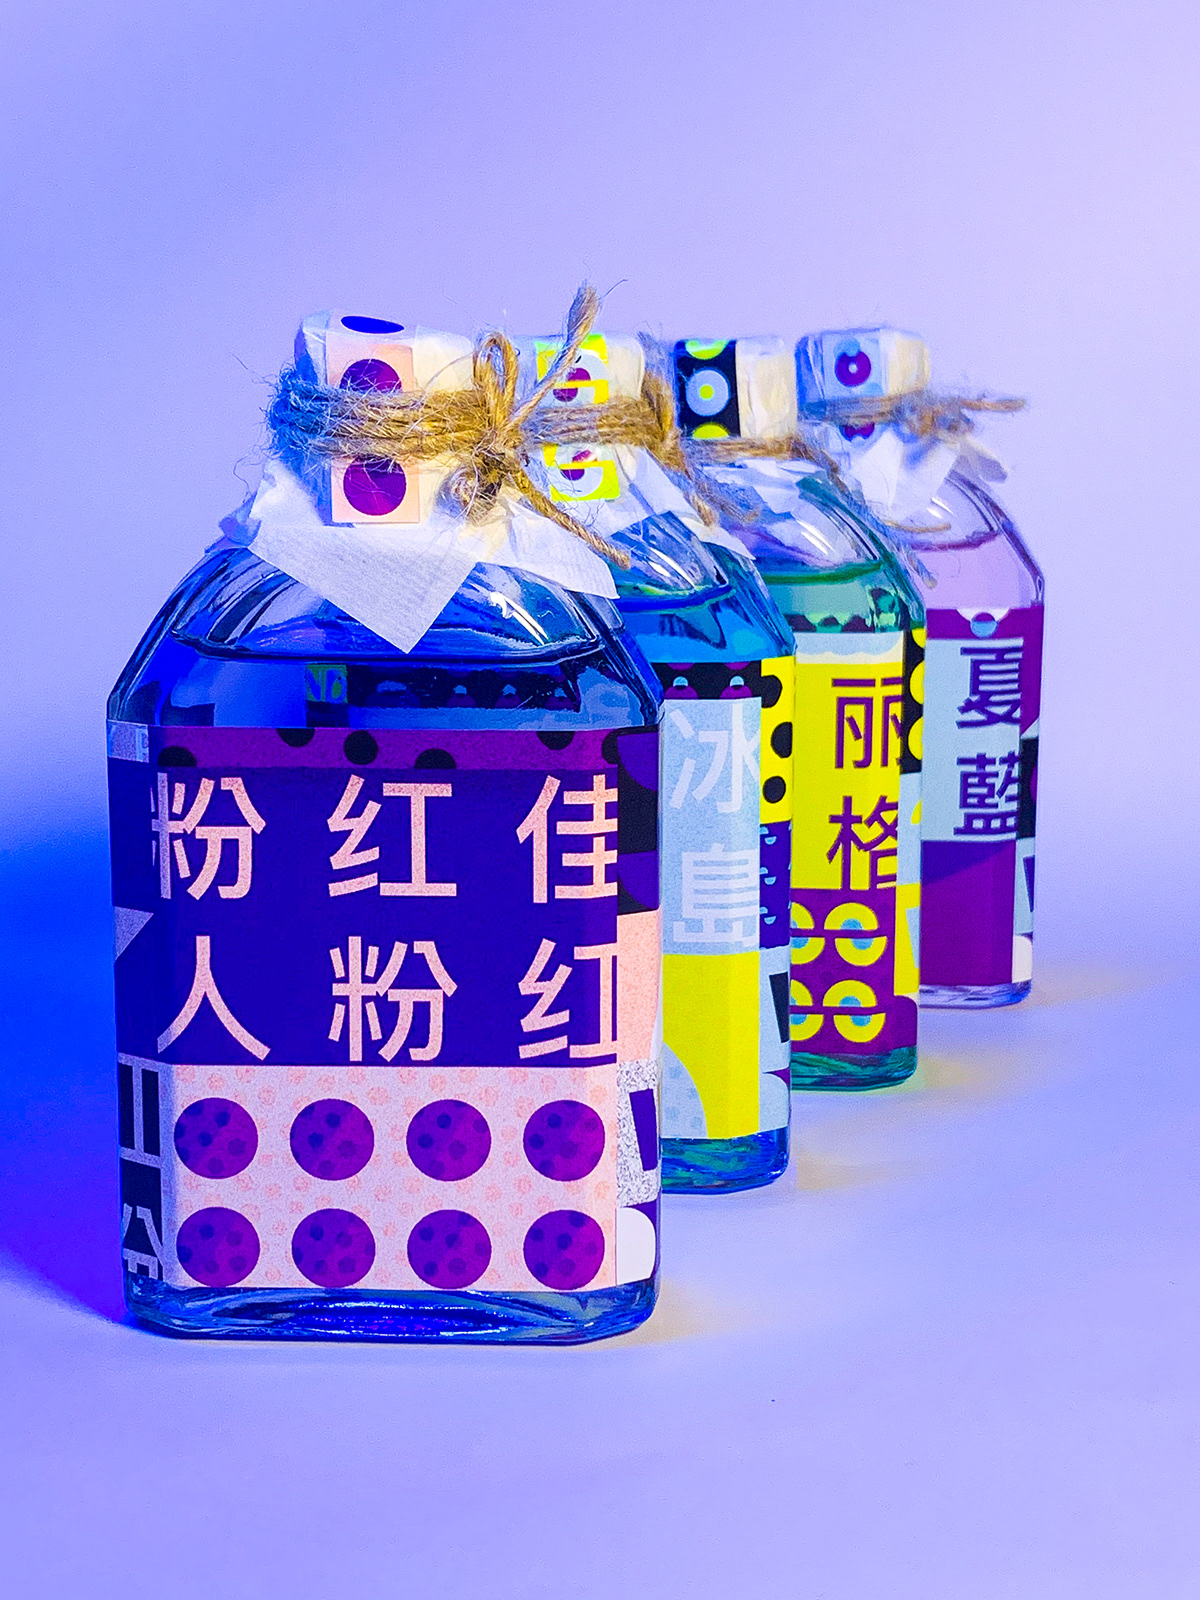 branding  Chinese typography design Packaging Patterns shapes symmetry